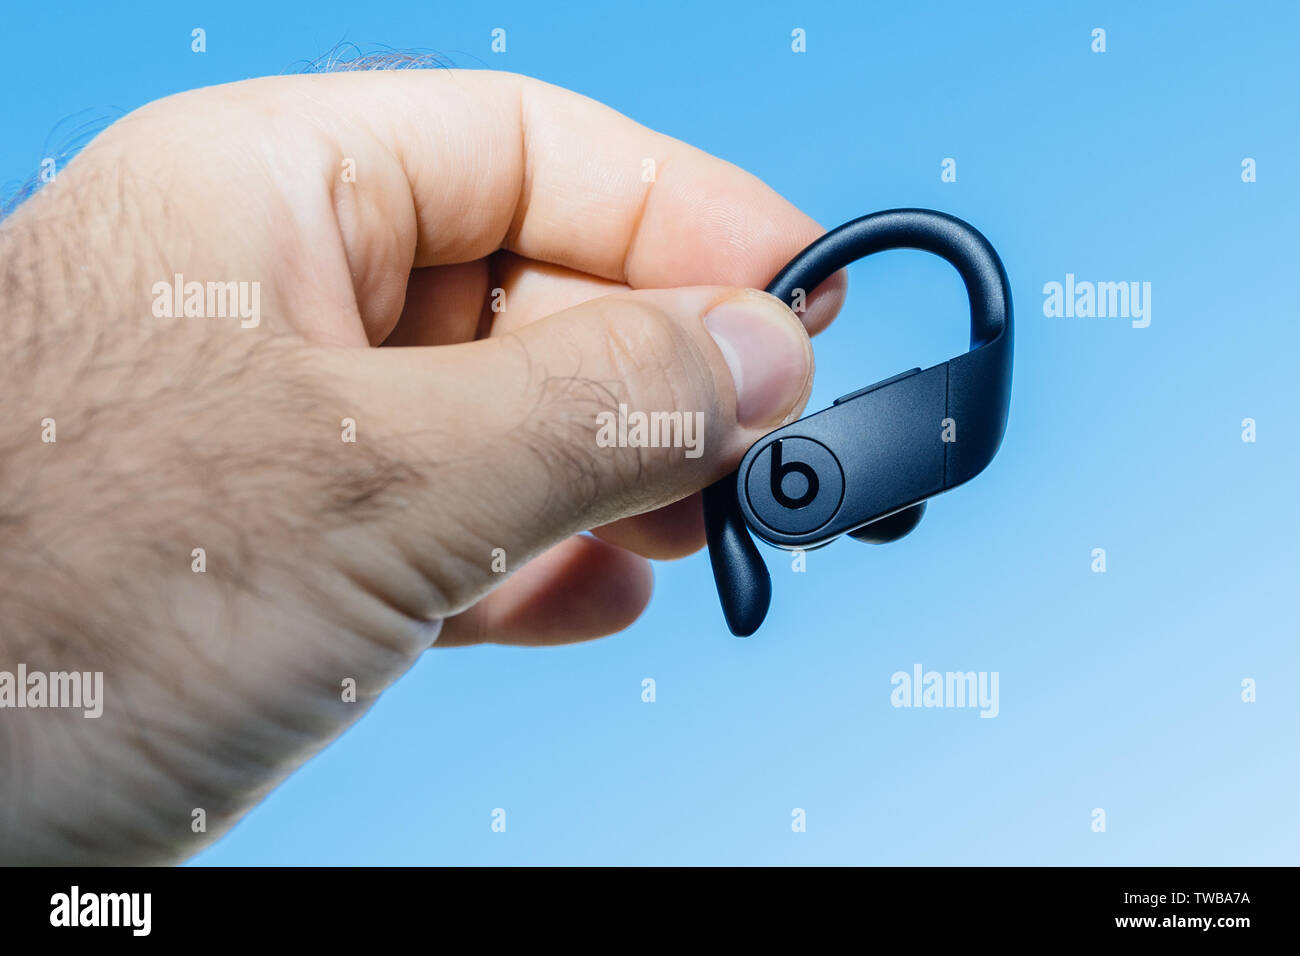 Paris, France - Jun 17, 2019: Close-up of man hand holding demonstrating new Apple Powerbeats Pro Beats by Dr Dre wireless high-performance earphone with integrated Siri - blue sky Stock Photo